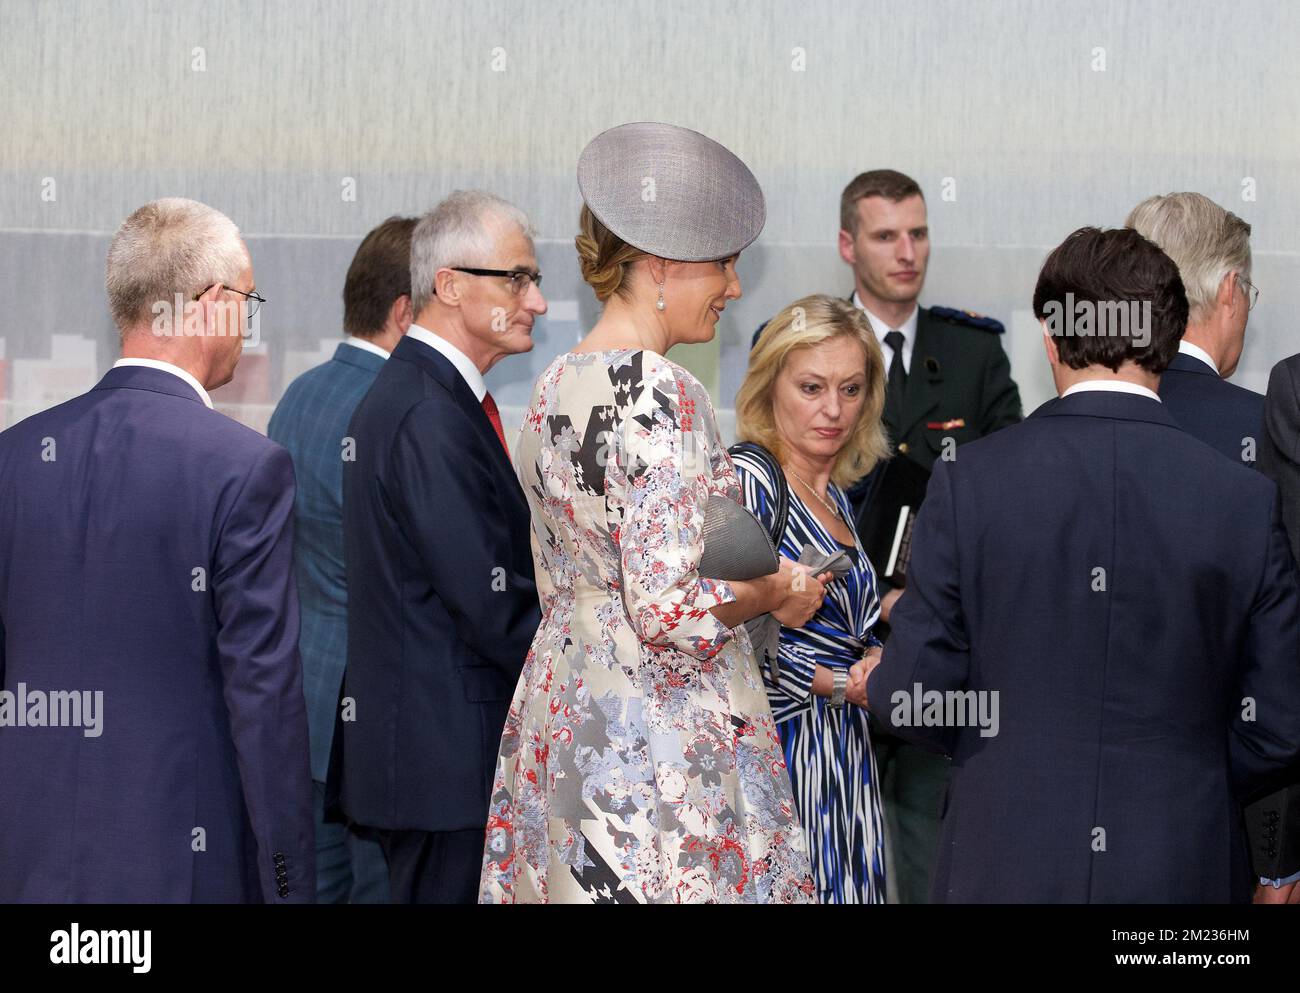 Queen Mathilde of Belgium pictured at the opening day of 'Frankfurter Buchmesse' Dutch and Flemish pavillon by both countries royals, Tuesday 18 October 2016, in Frankfurt, Germany. Flanders and the Netherlands together will are the Guest of Honour at the Frankfurt Book Fair with the slogan 'Dit is wat we delen' - 'This is what we share' from 19 to 23 October. BELGA PHOTO NICOLAS MAETERLINCK Stock Photo